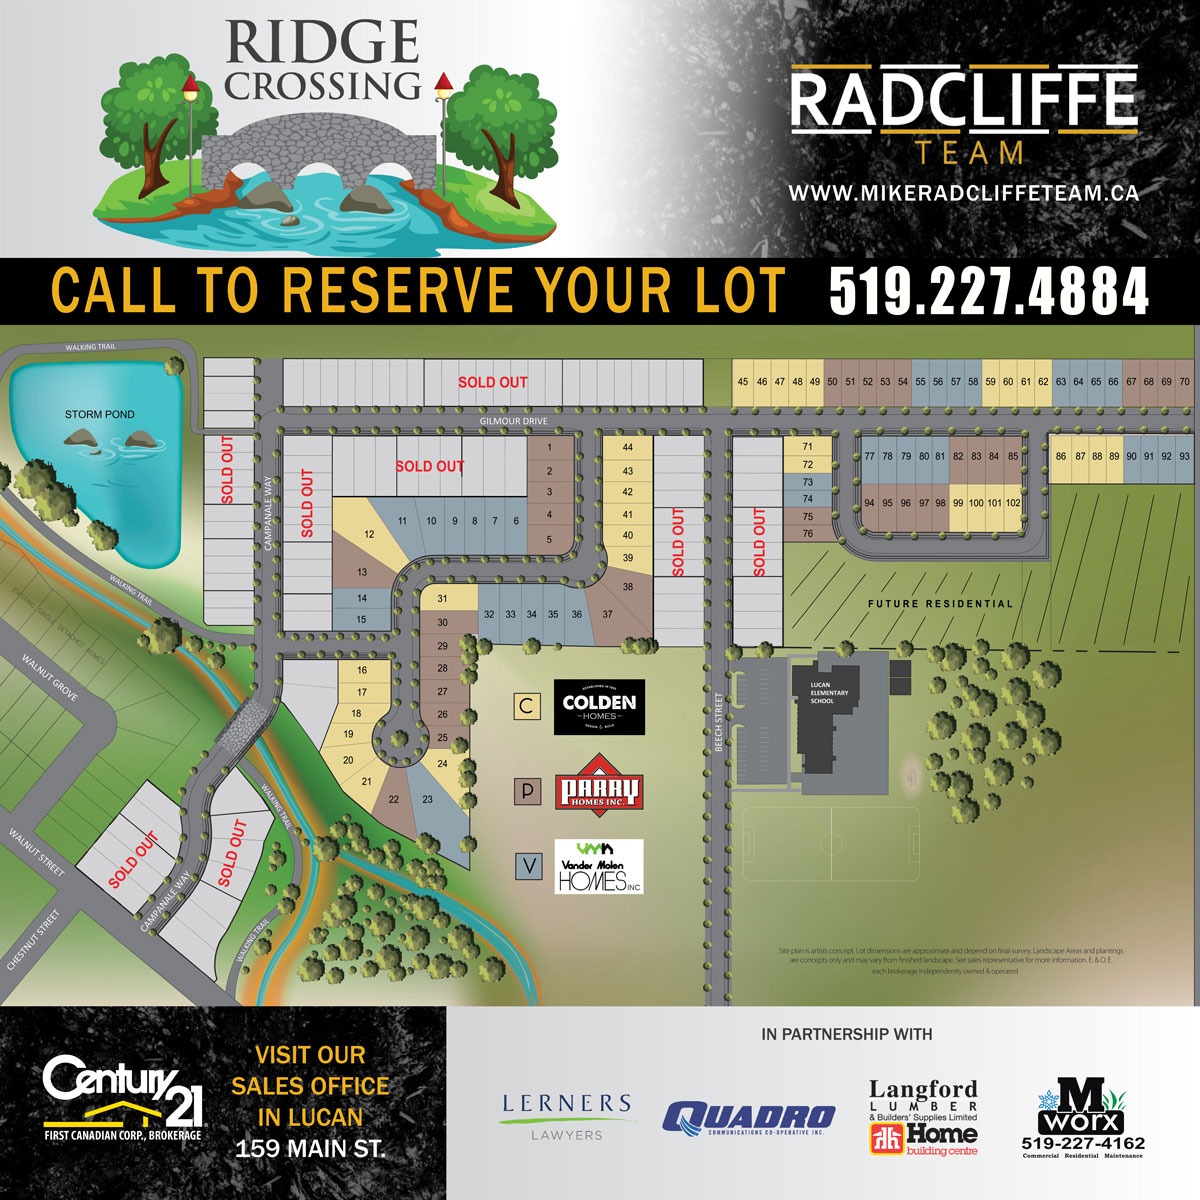 Ridge Crossing map showing available and sold lots.